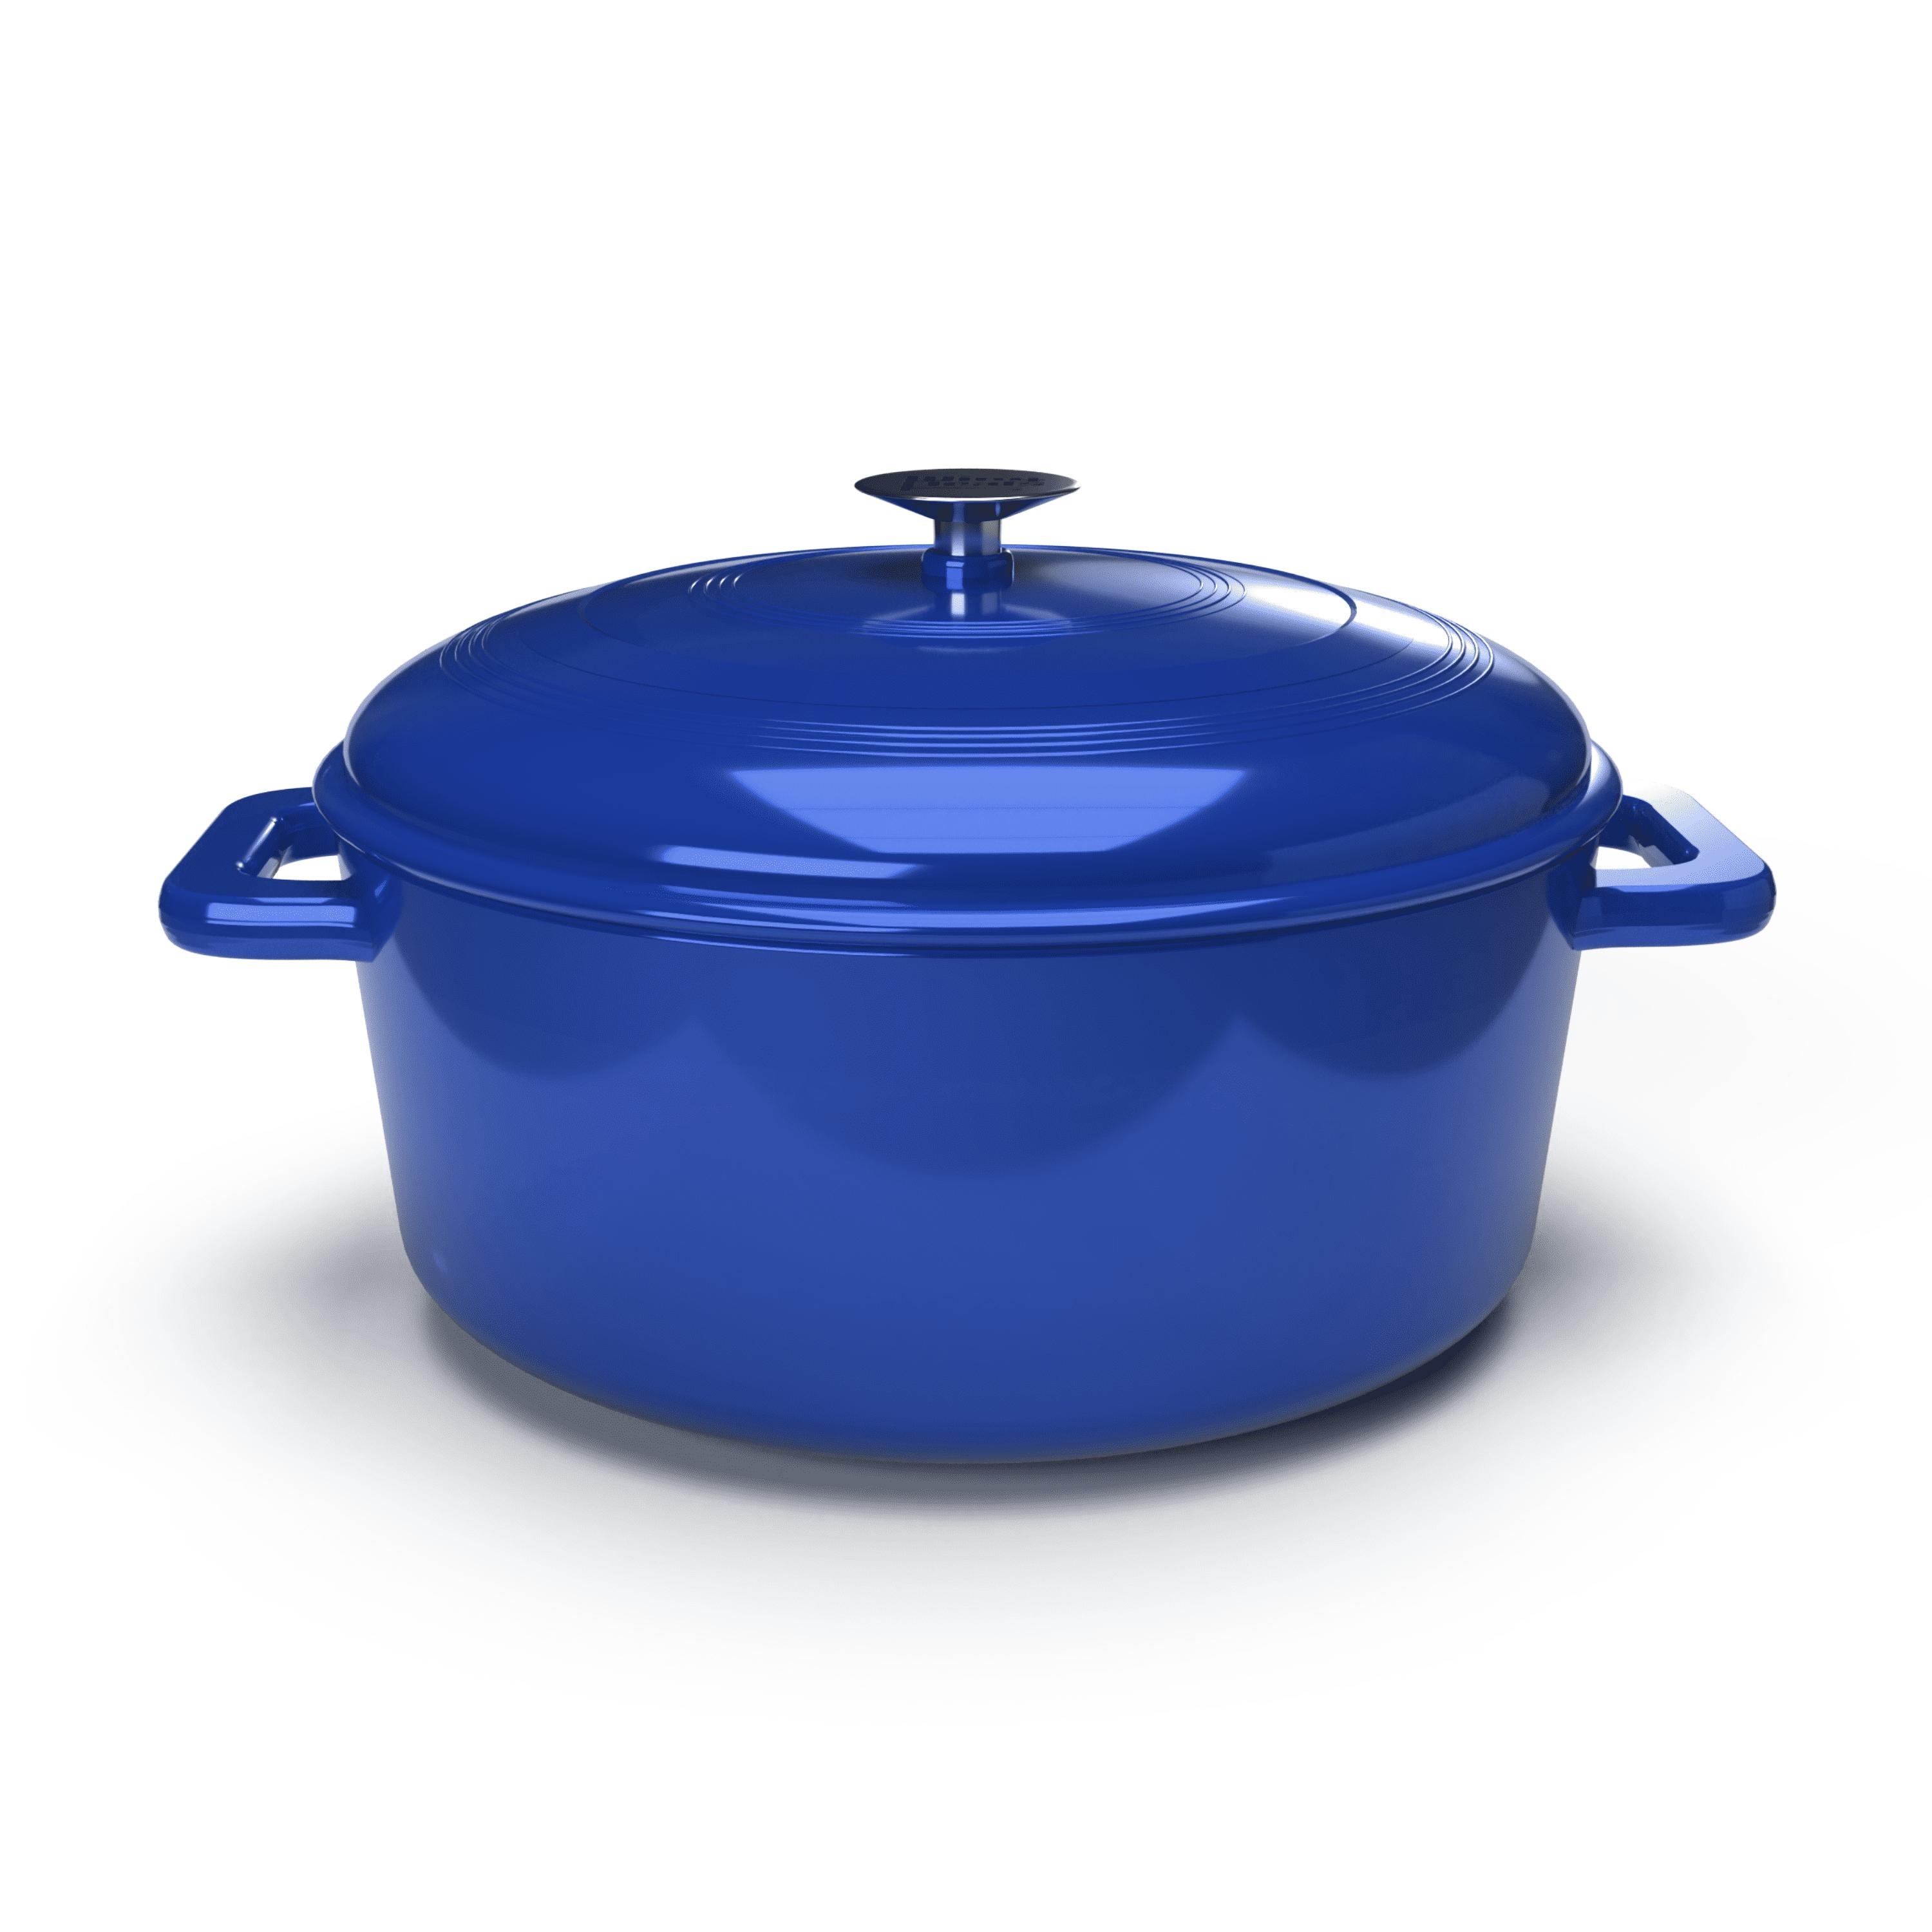 https://ak1.ostkcdn.com/images/products/is/images/direct/29ba07d2bc24542acd1d7de3f37c202a534ac575/Enameled-Cast-Iron-Dutch-Oven-Stockpots-with-Lid.---Blue.jpg